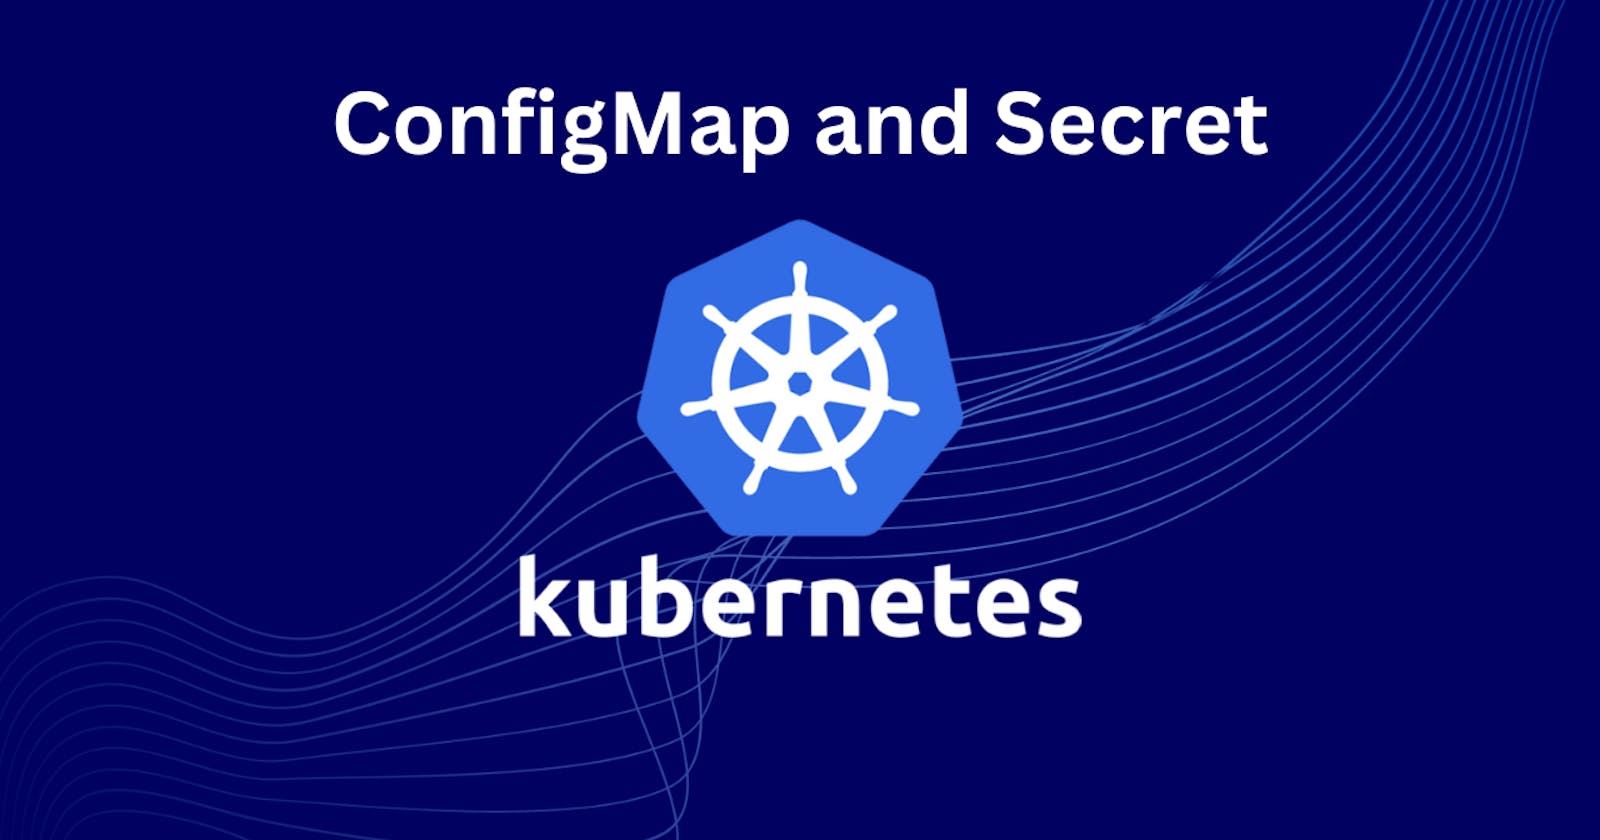 ConfigMaps and Secrets in k8s